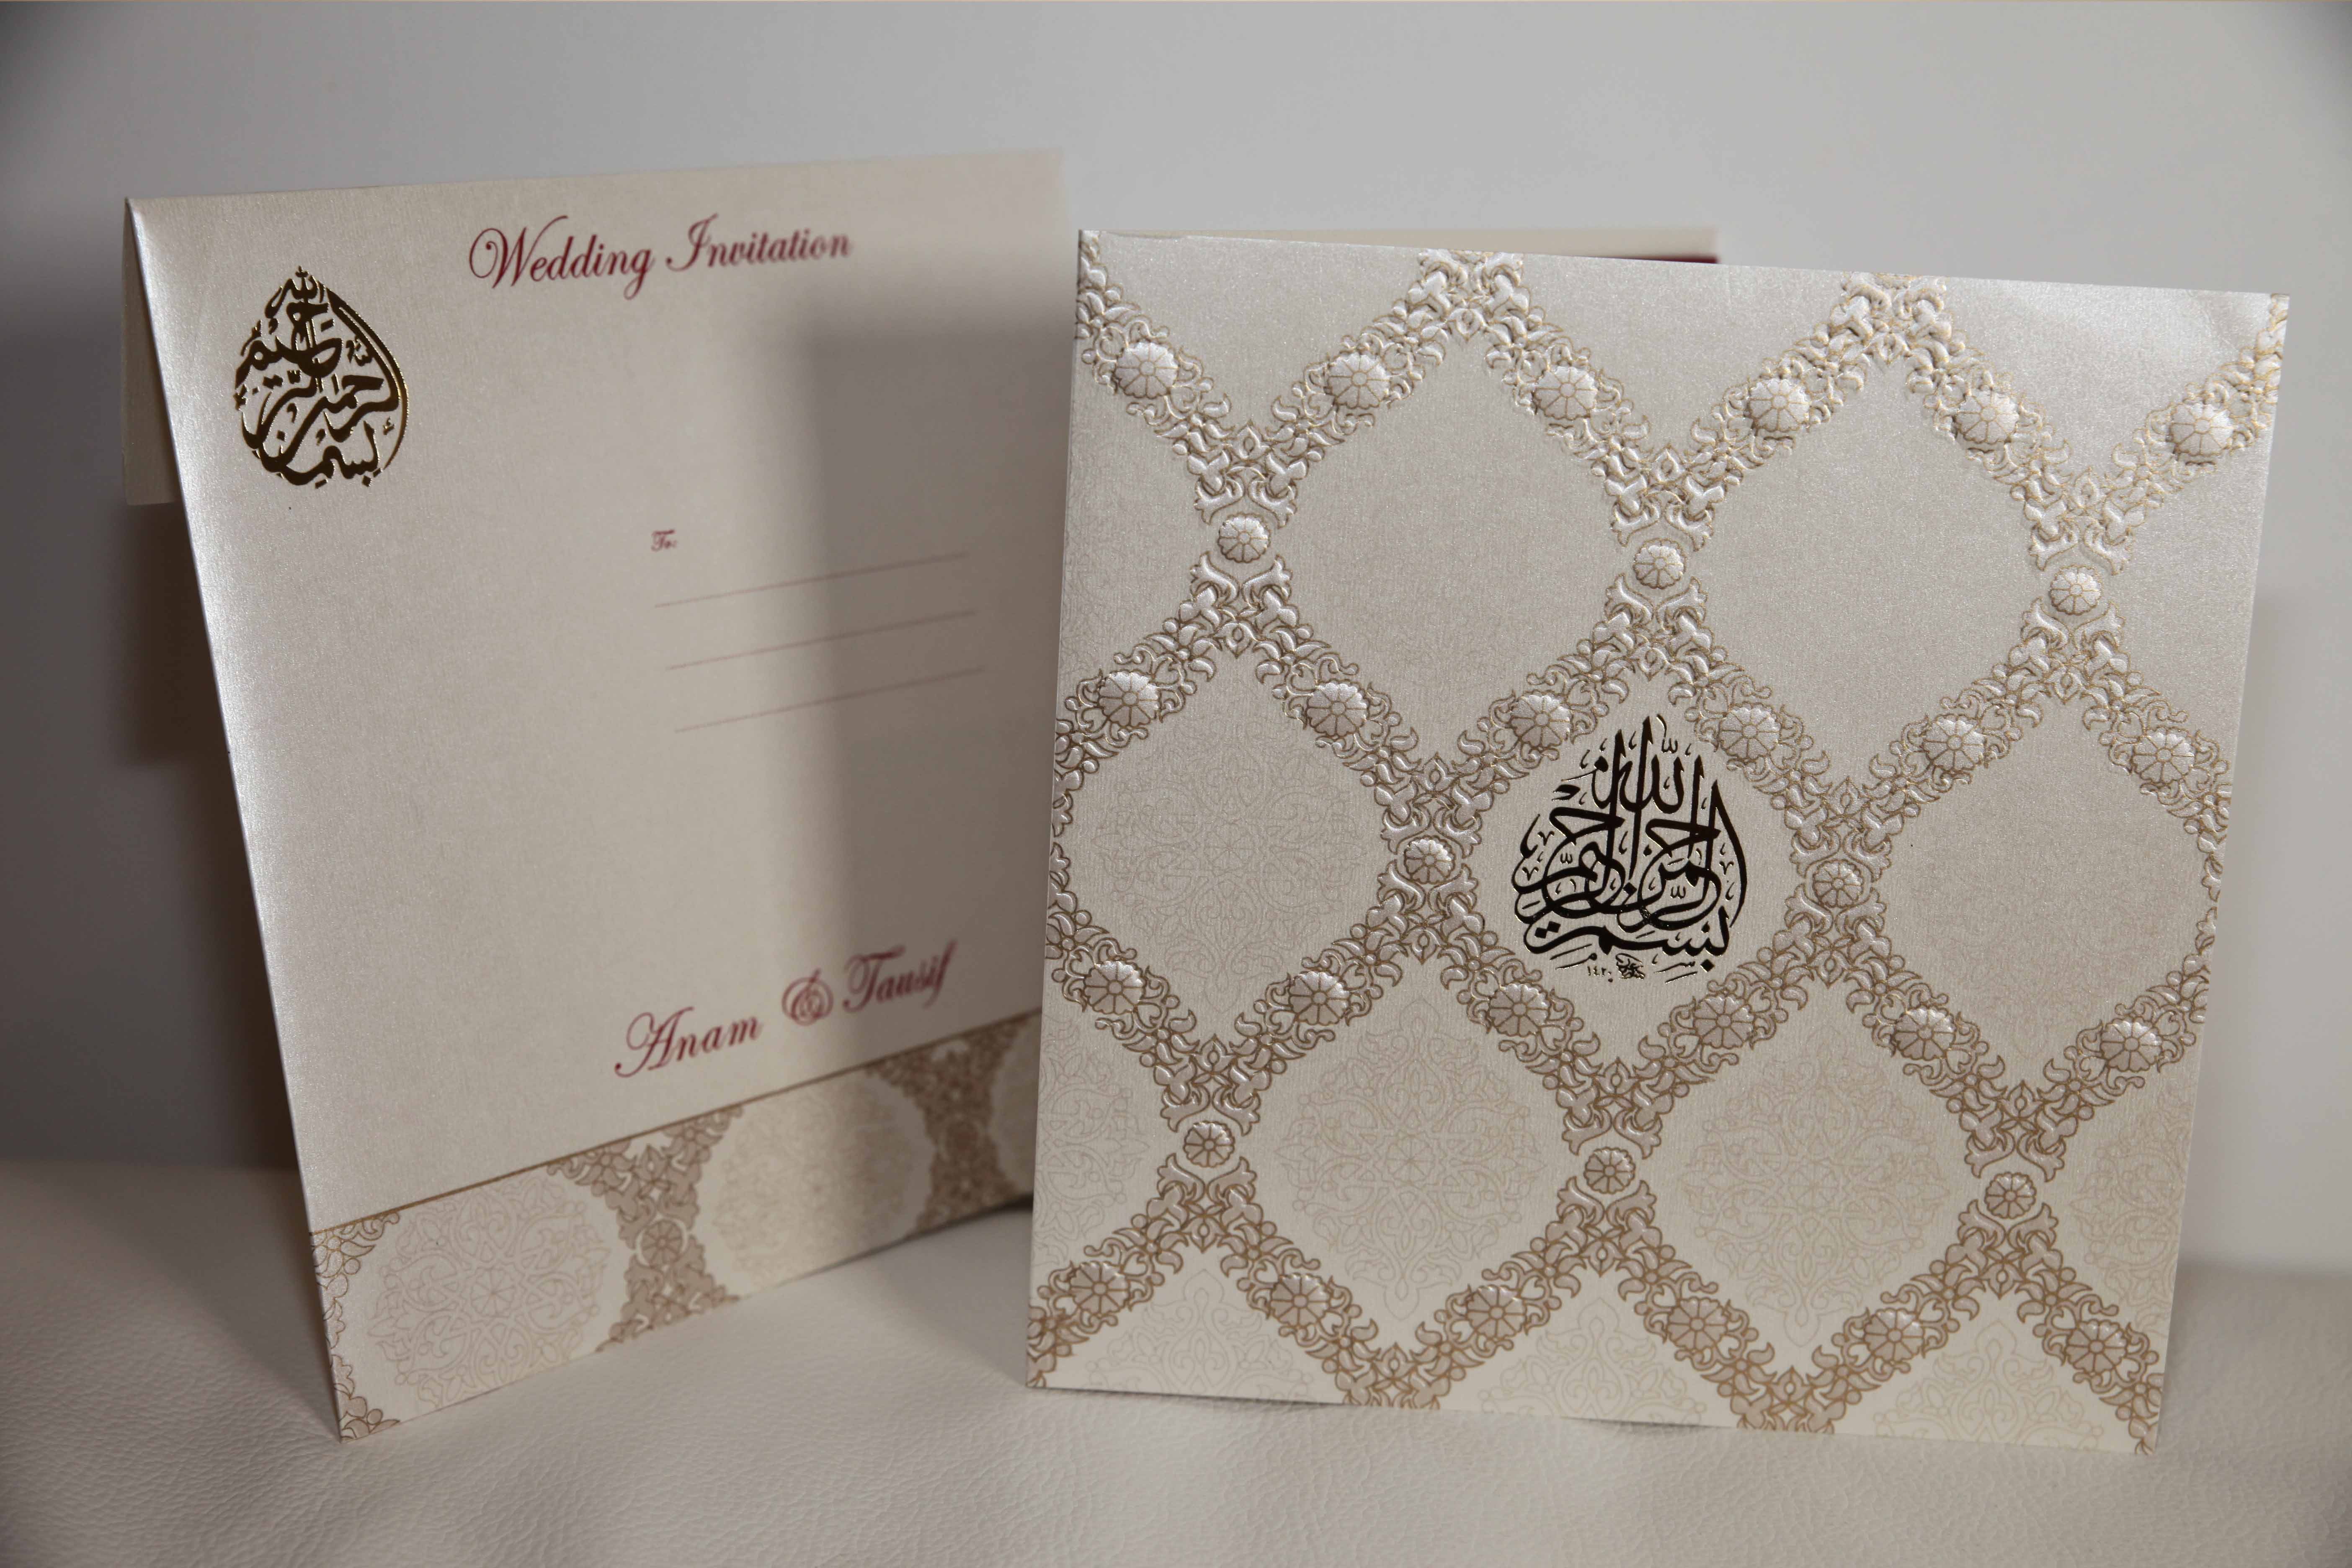 Muslim wedding Cards is a well known brand in the UK